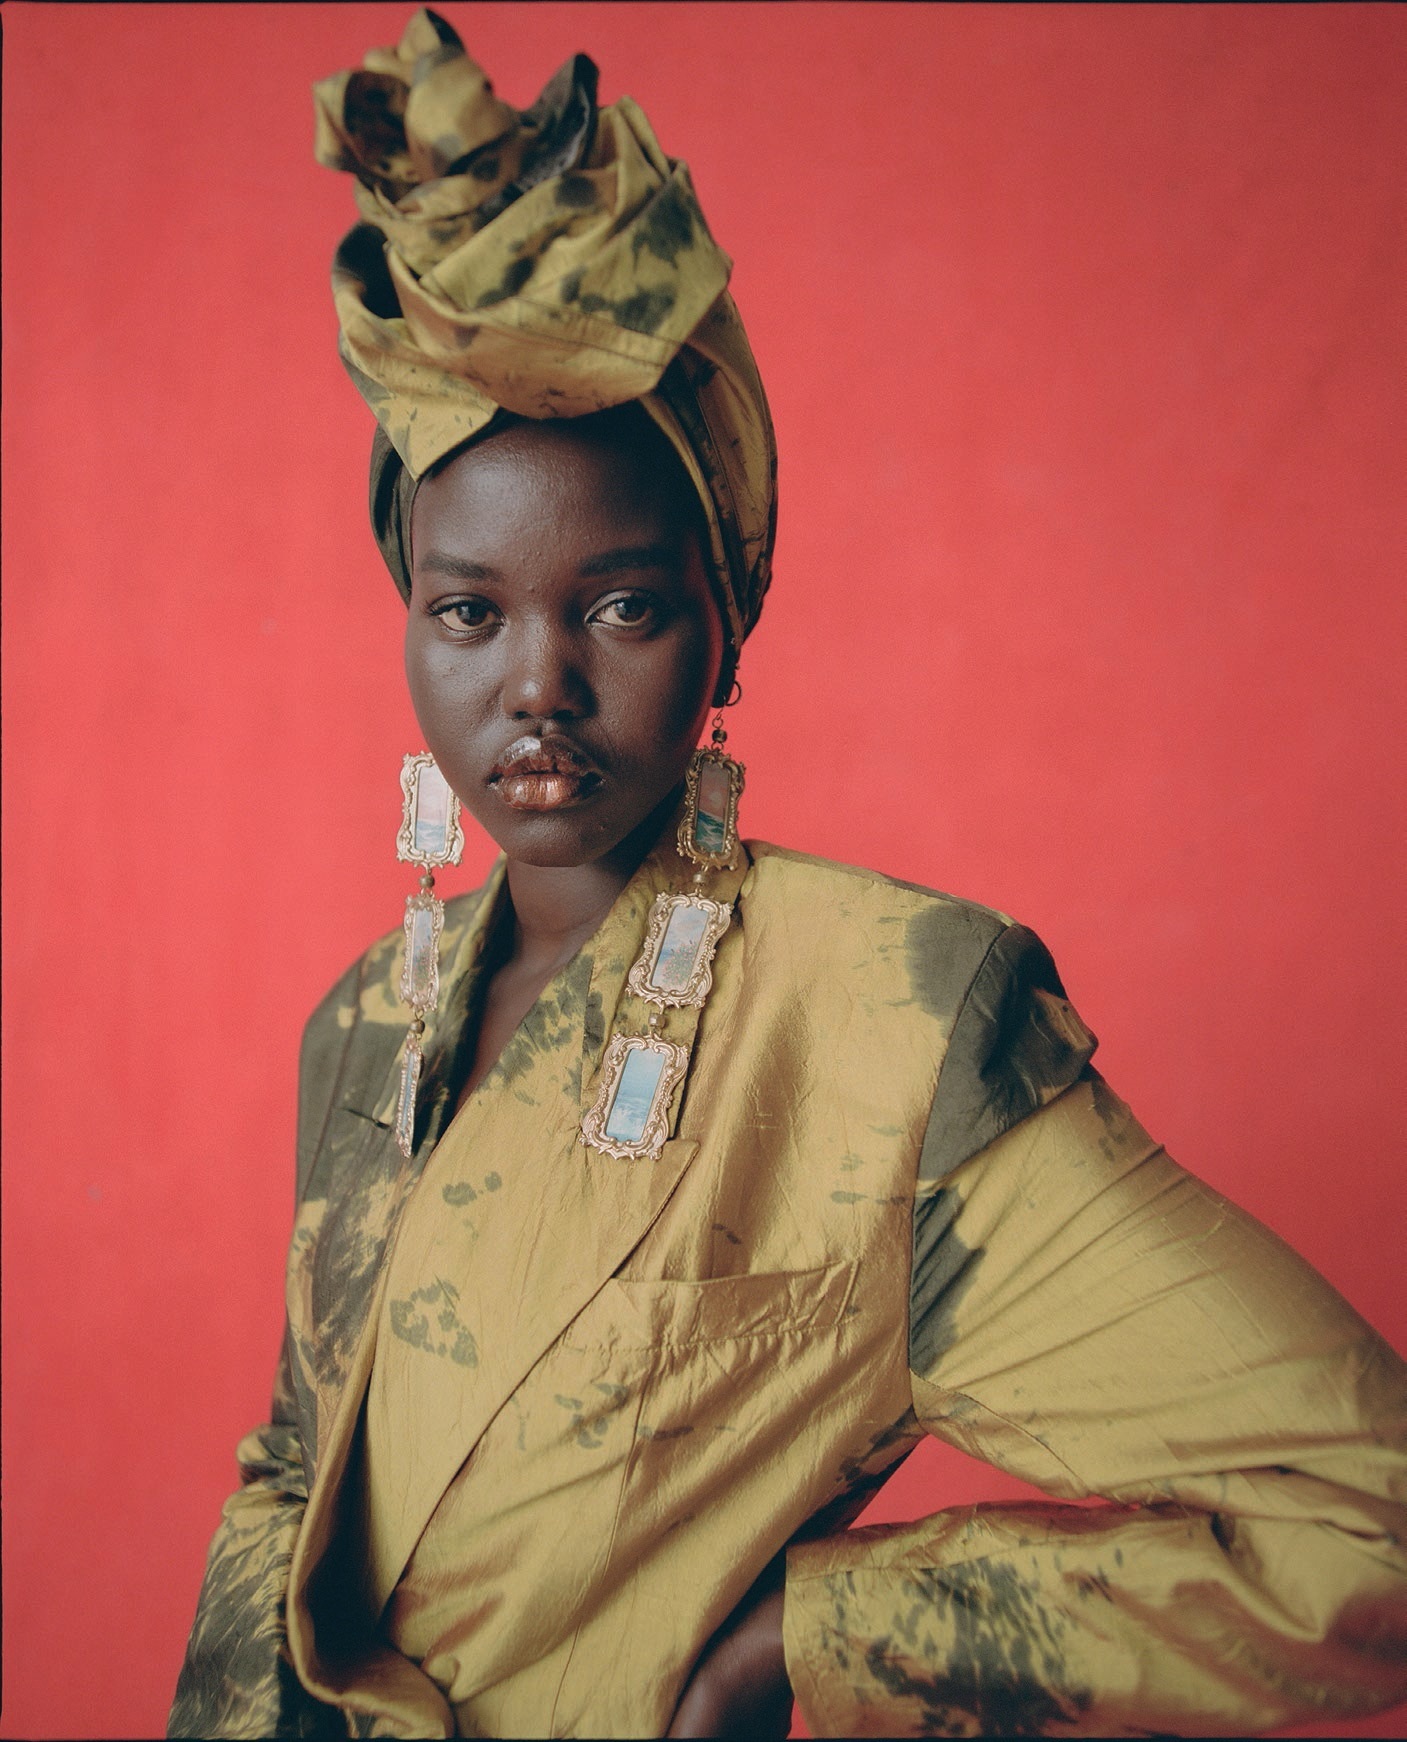 Model Adut Akech featured in American Vogue’s “Family Values” editorial in December 2020 Photographed by Nadine Ijewere